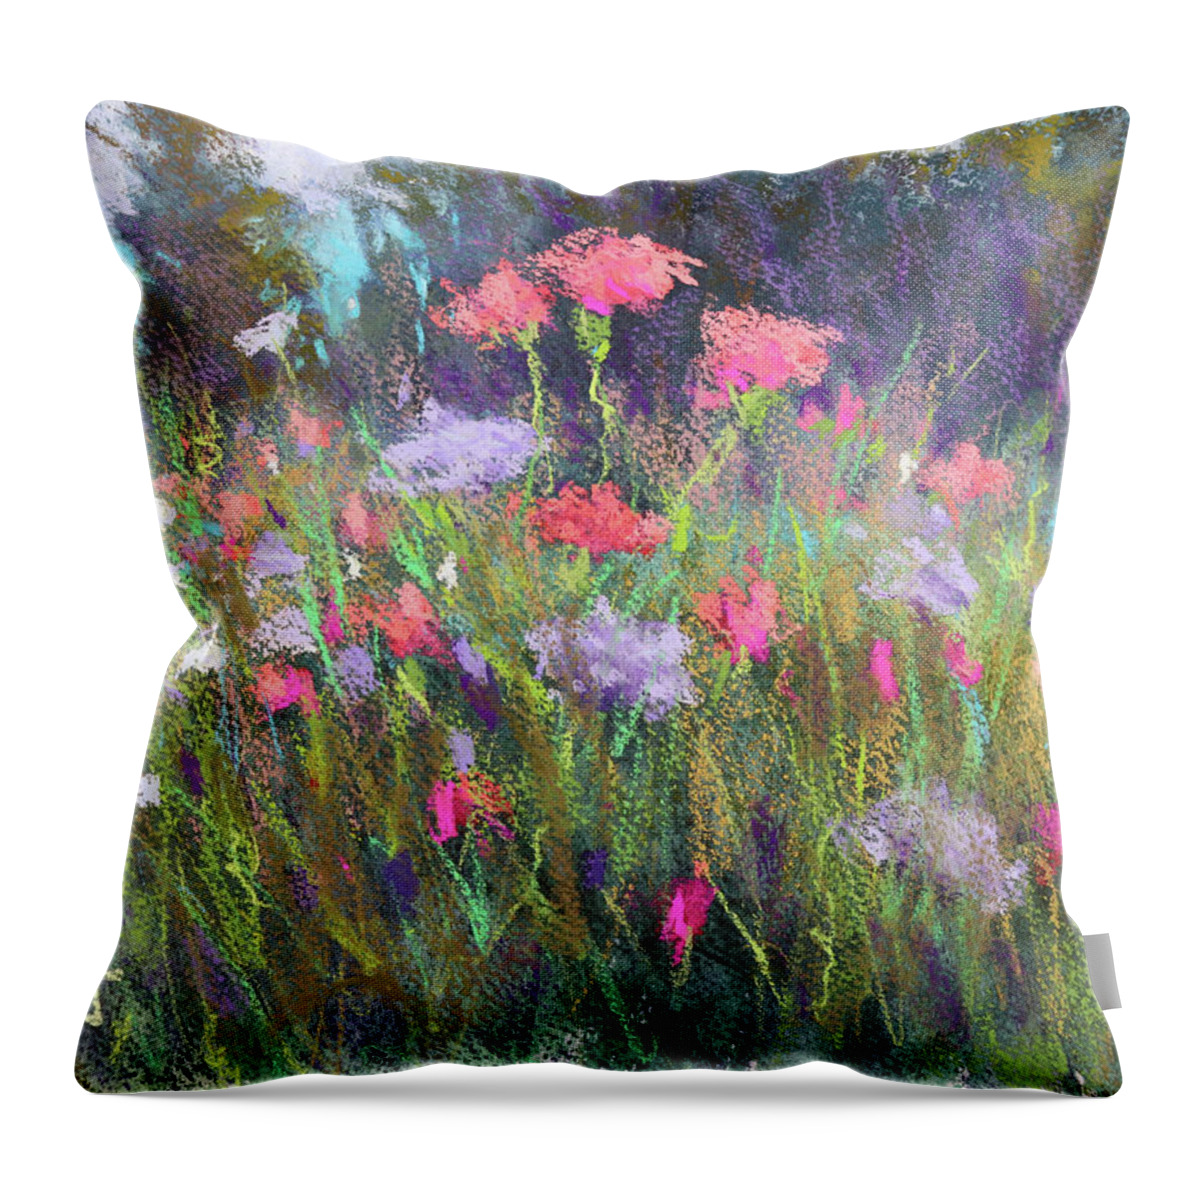 Wildflowers Throw Pillow featuring the painting Tangled Beauty by Susan Jenkins